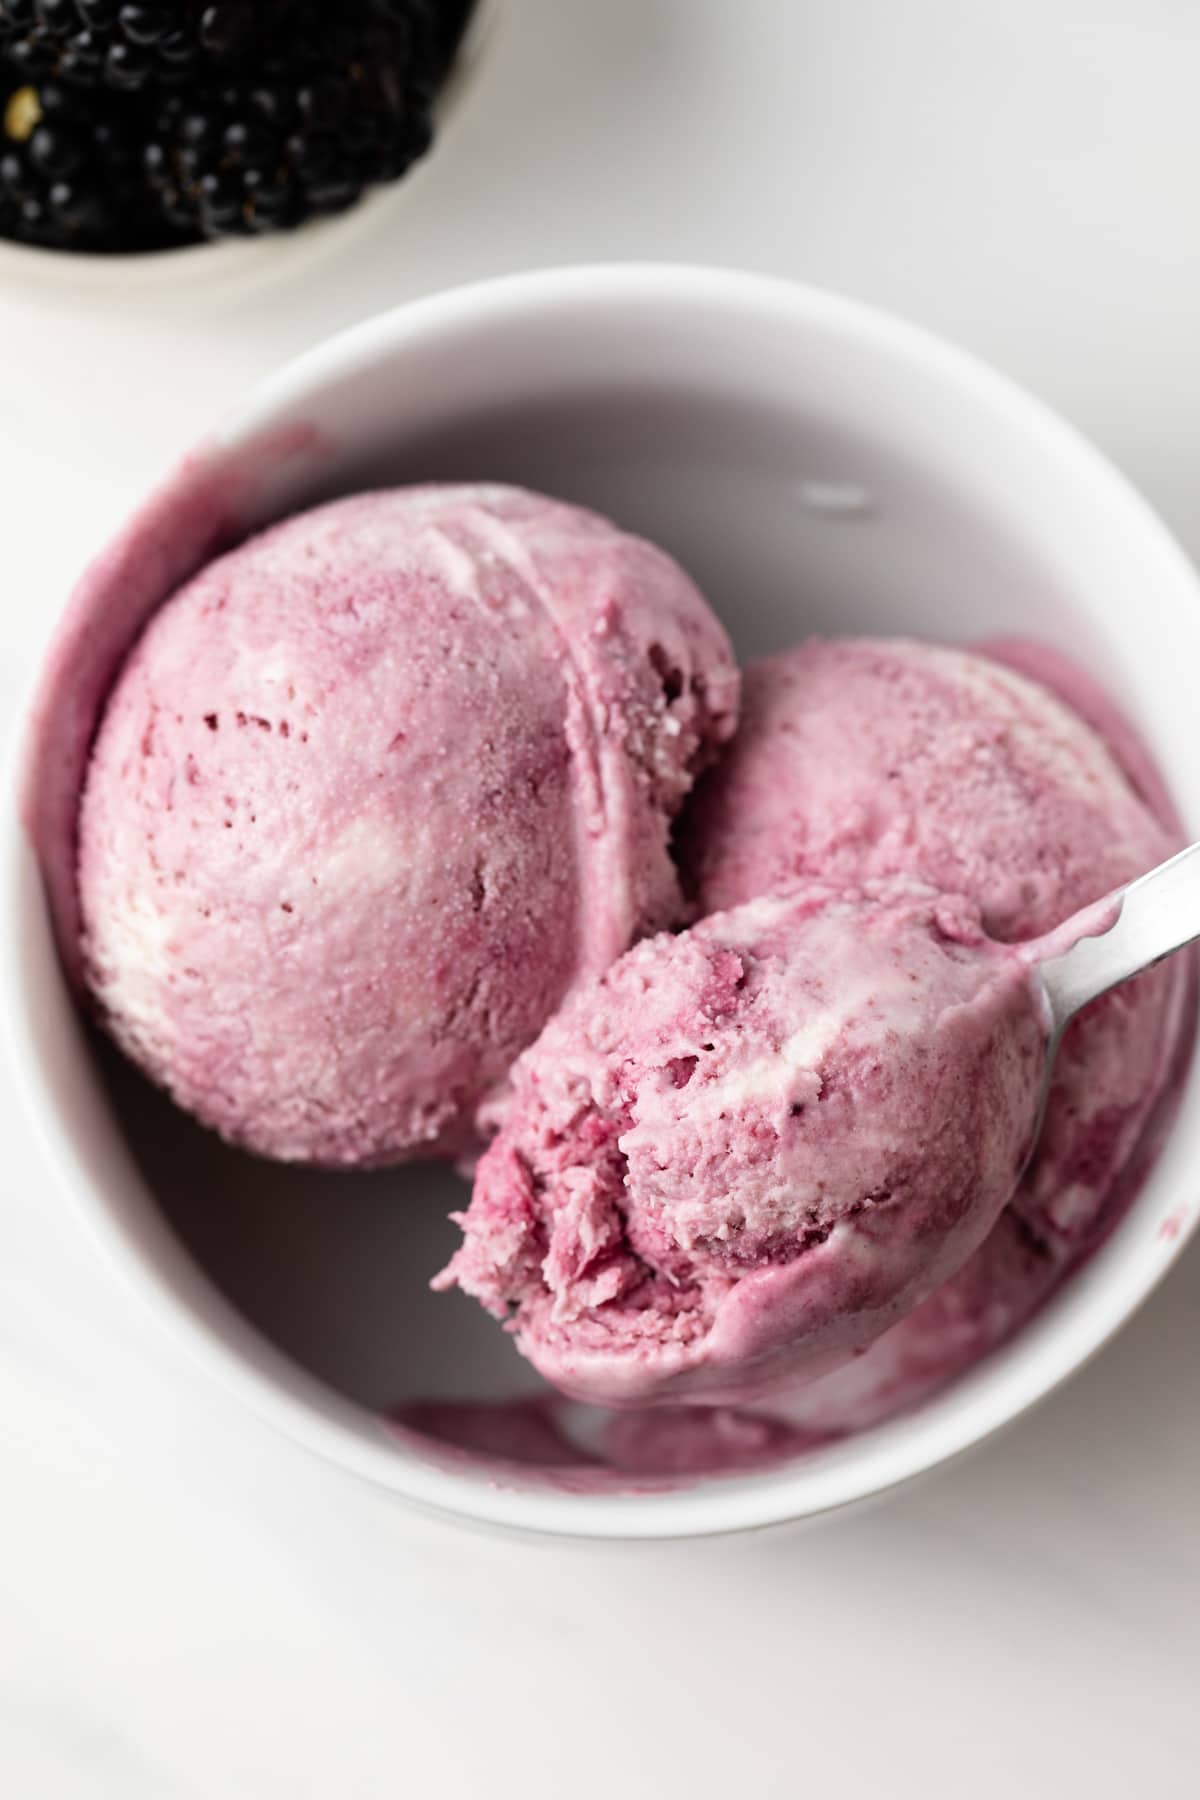 Spoon scooping out blackberry swirled ice cream.